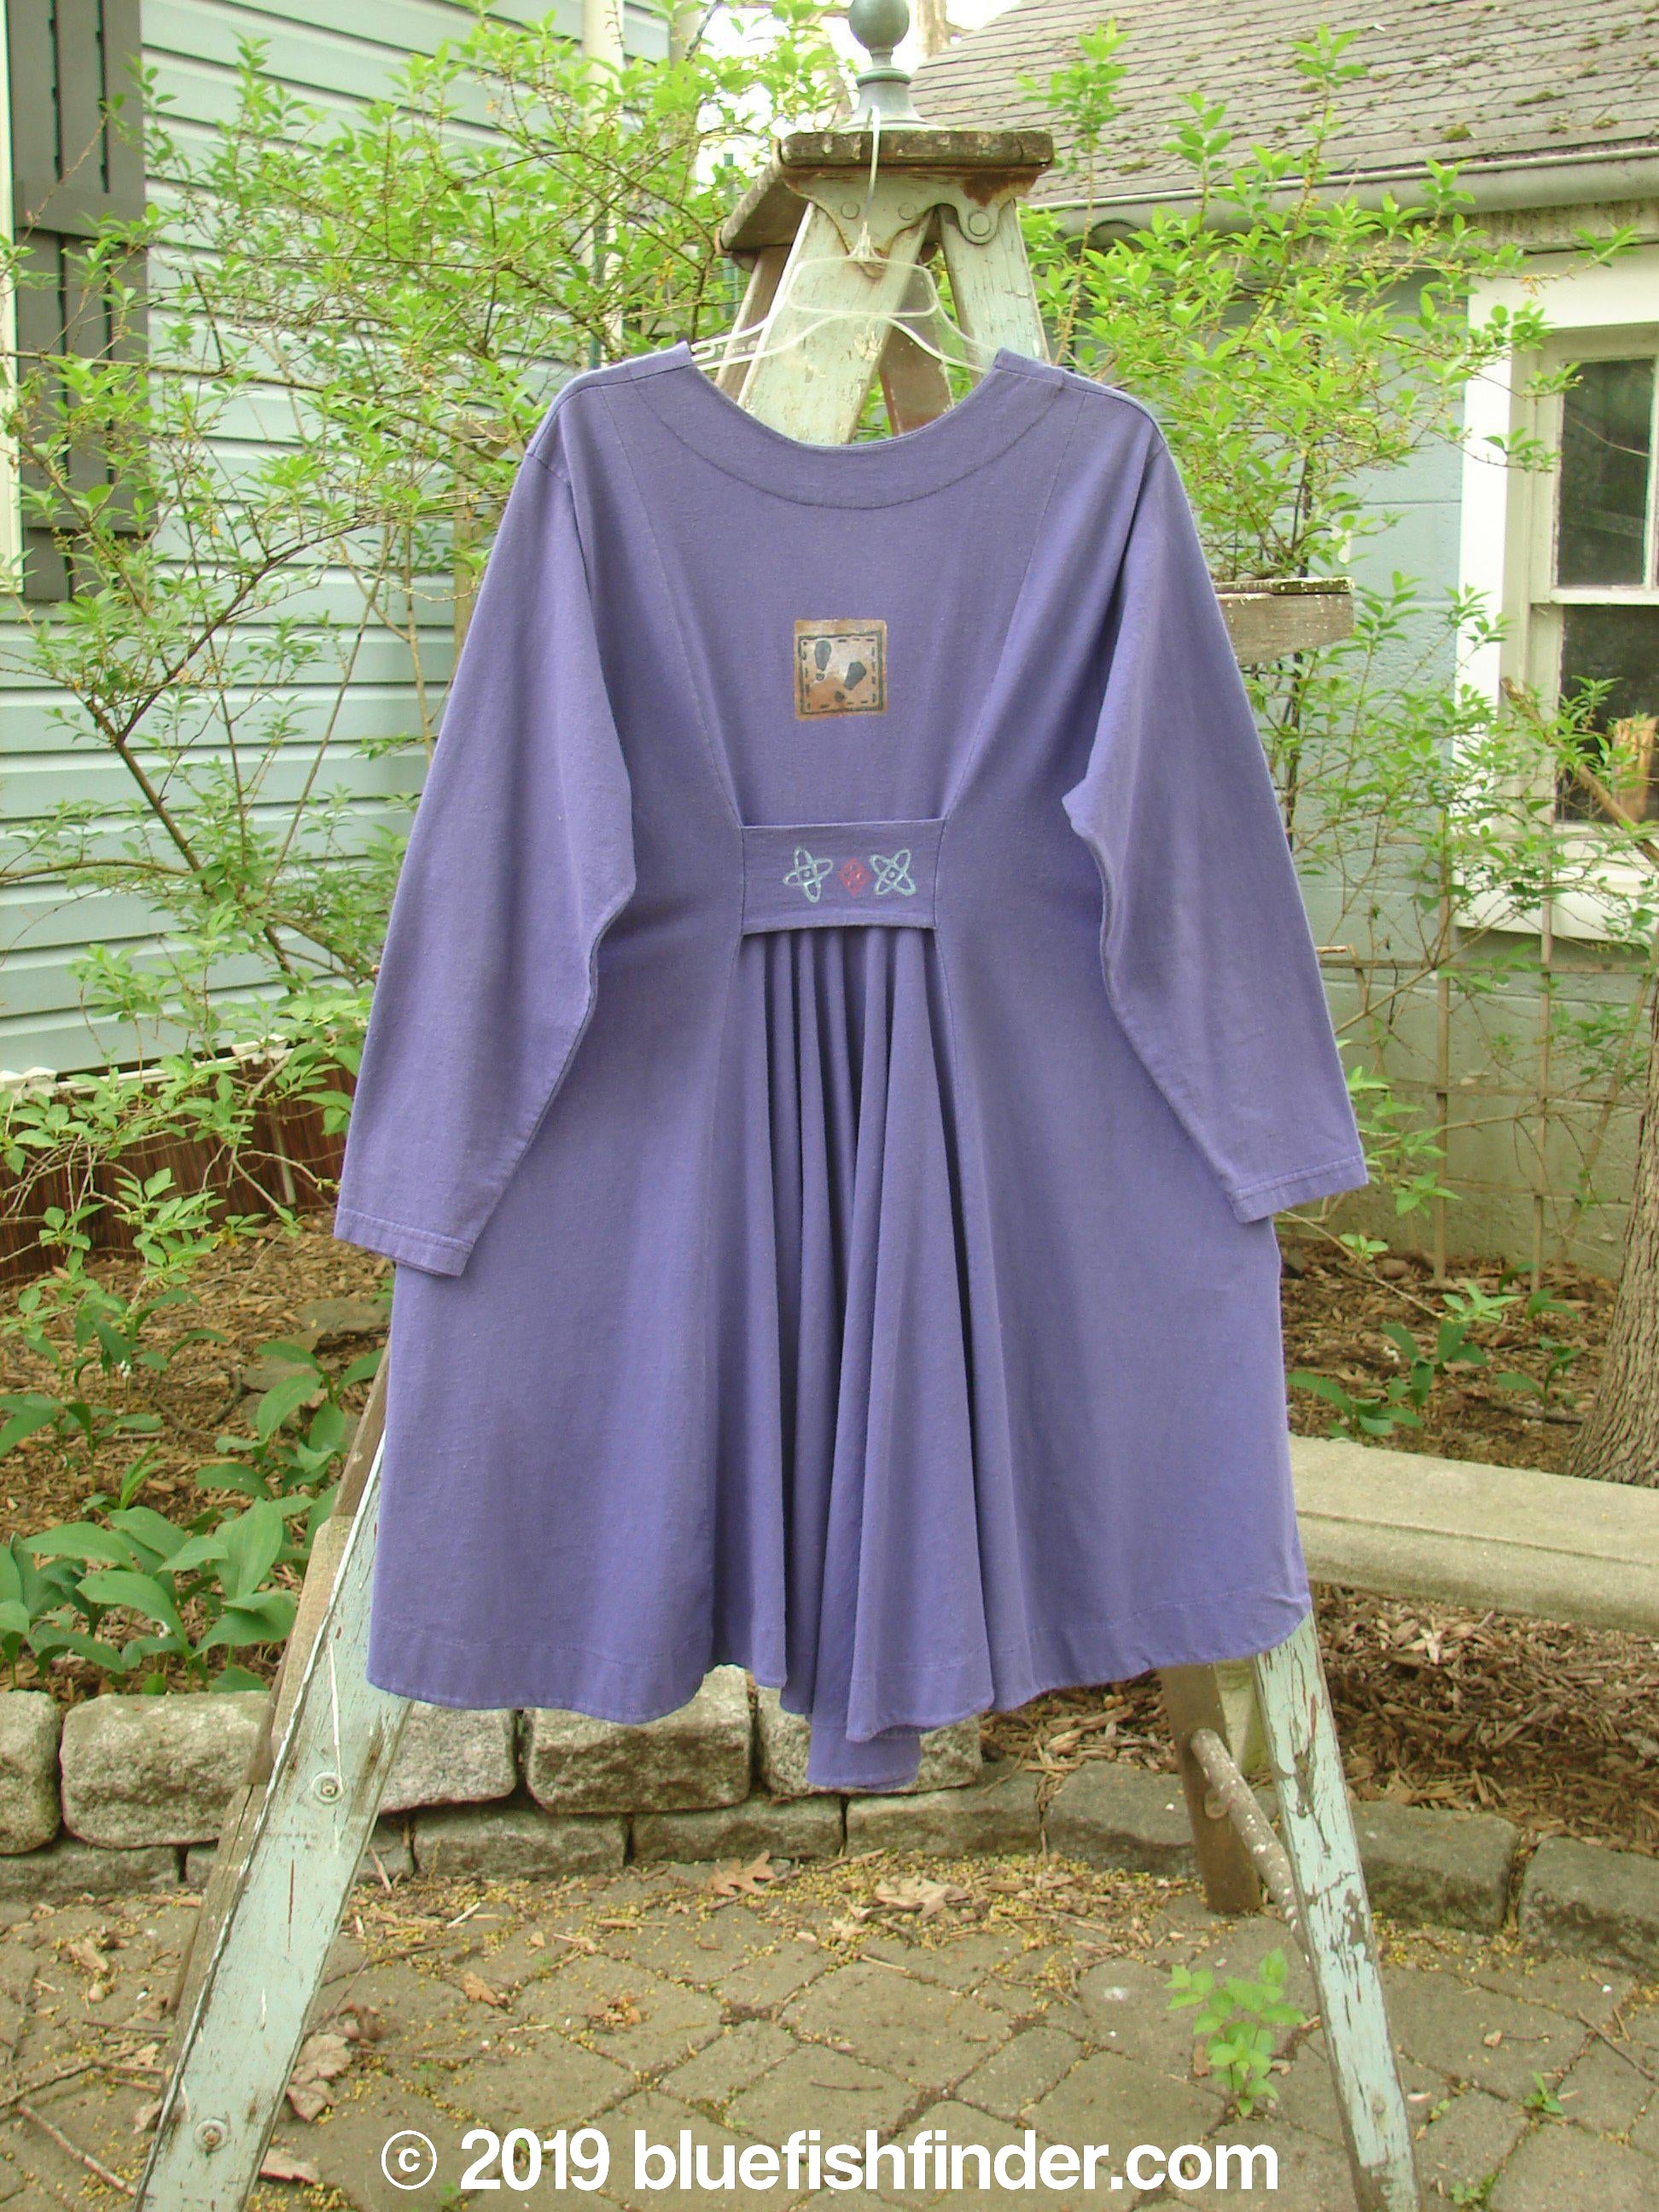 Image alt text: "1996 Dining Car Jacket Travel Niagara Size 1: Purple dress on a clothes rack, featuring a V-shaped neckline, artisan porcelain buttons, and deep side pockets."